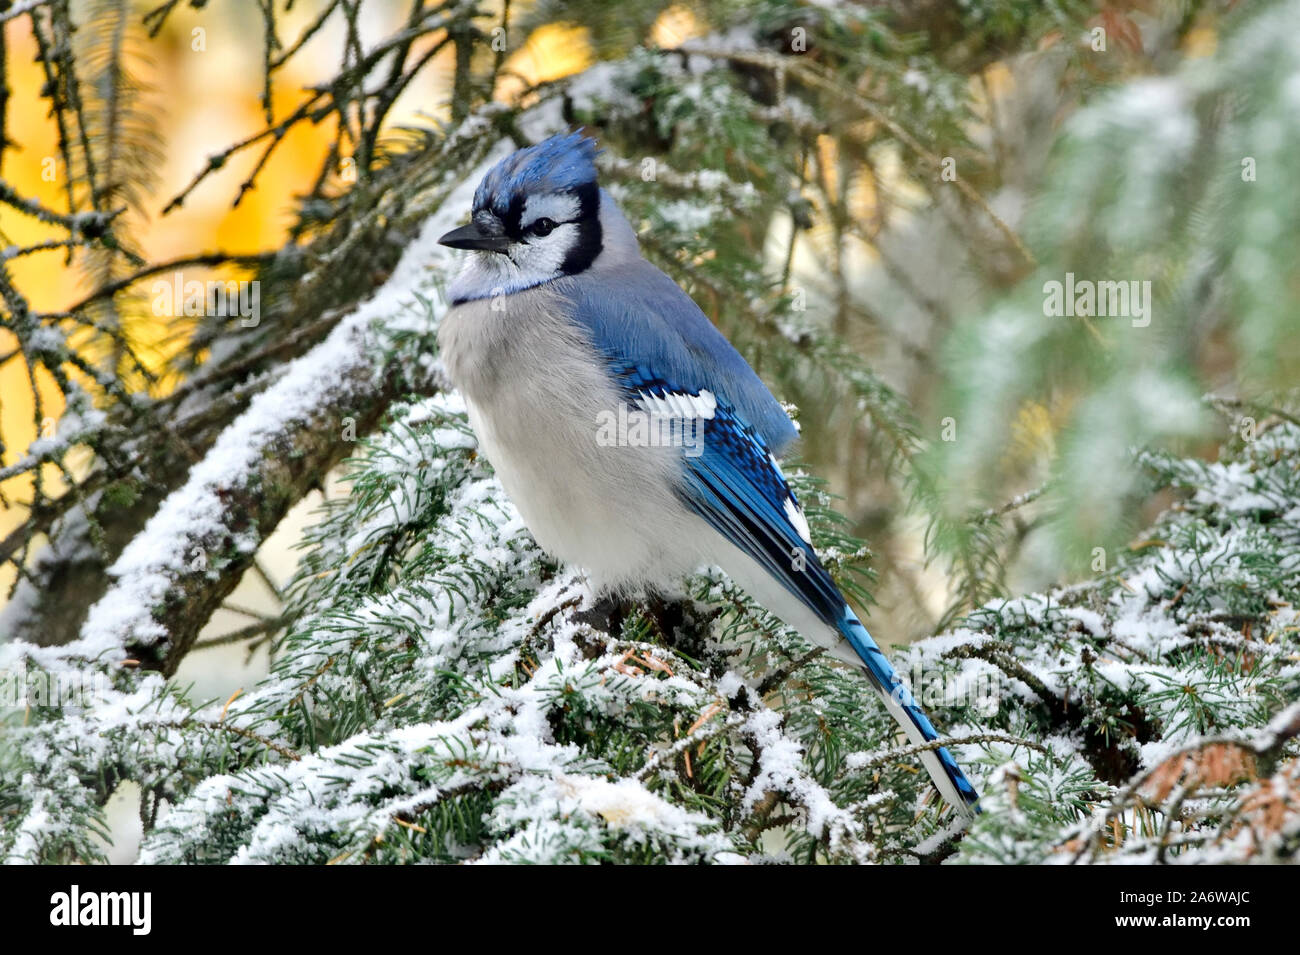 An eastern blue jay bird  ( Cyanocitta cristata), perched in a spruce tree with fresh autumn snow on the branches in rural Alberta Canada. Stock Photo